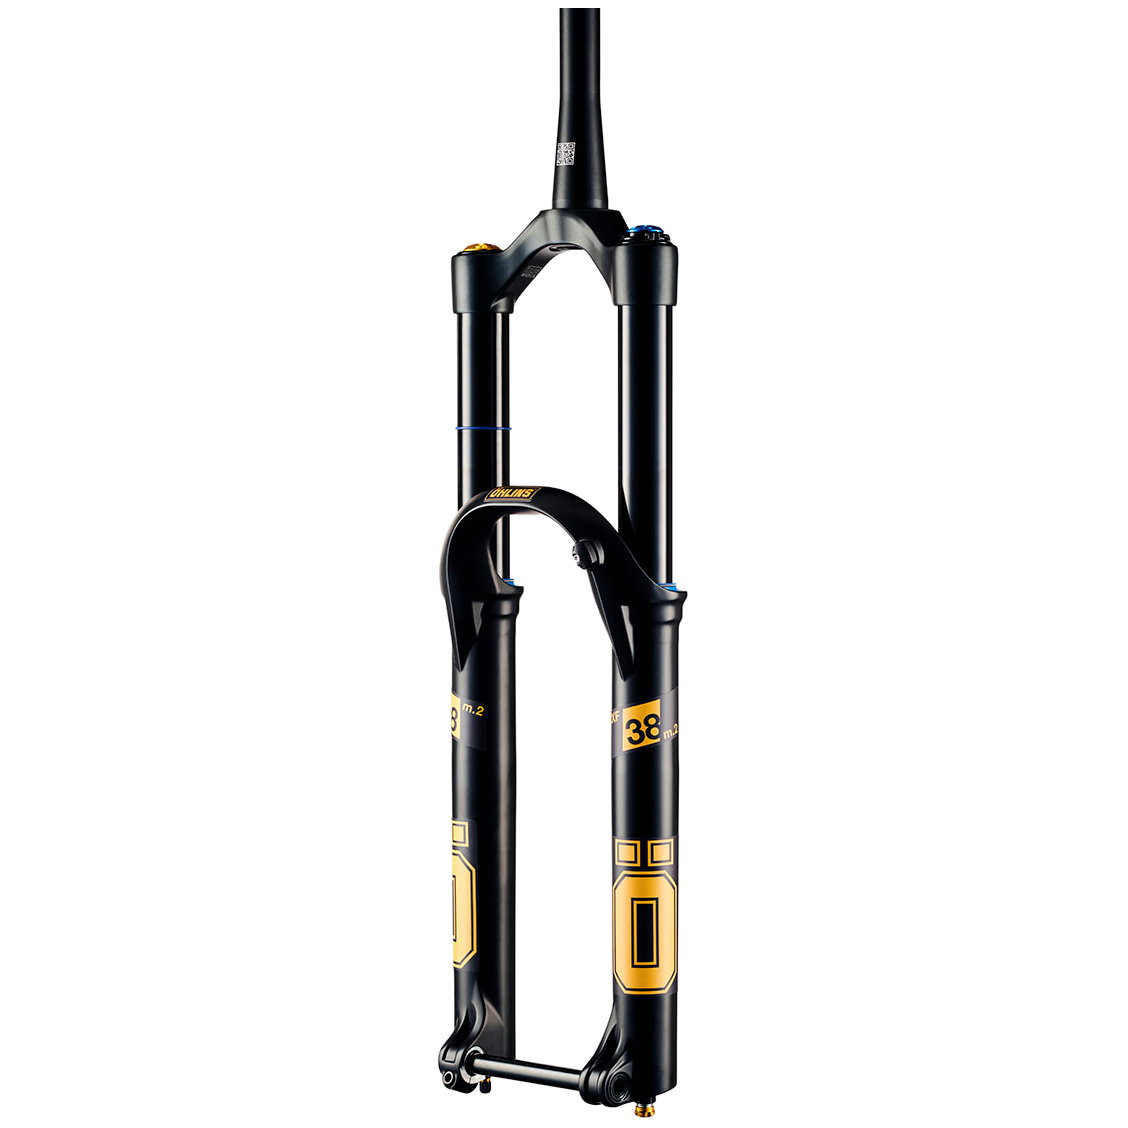 Productfoto van ÖHLINS RXF38 m.2 Air 29&quot; Fork - 160mm - Tapered - 15x110mm Boost - Offset 44mm